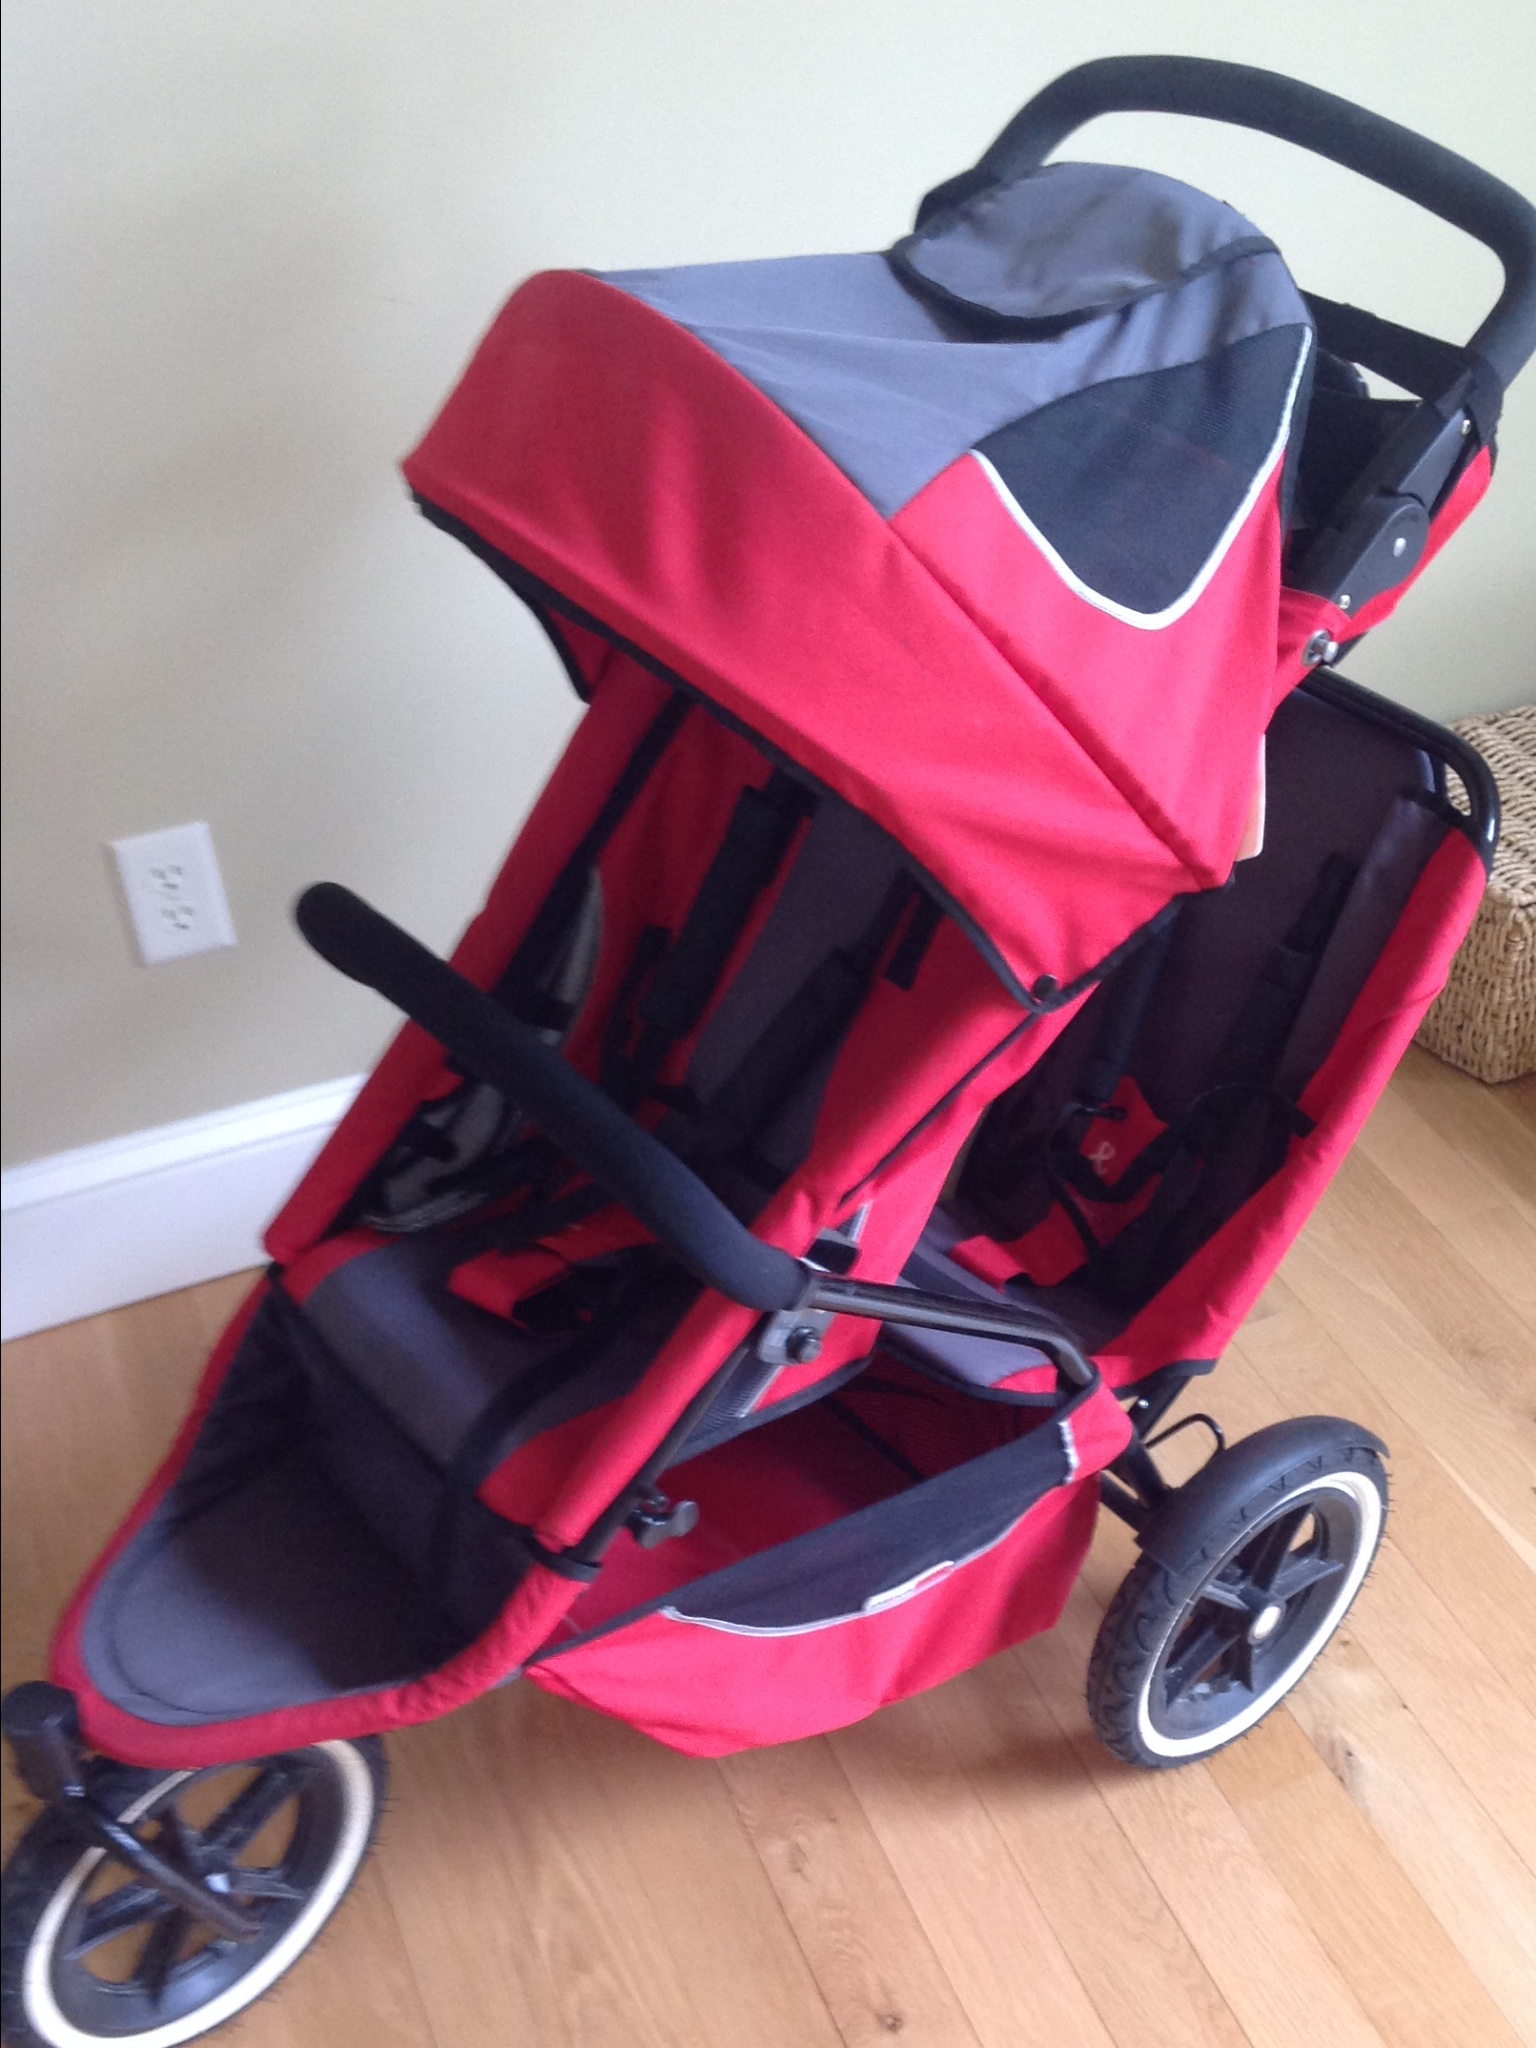 Stroller - Phil & Teds Double Buggy Sport